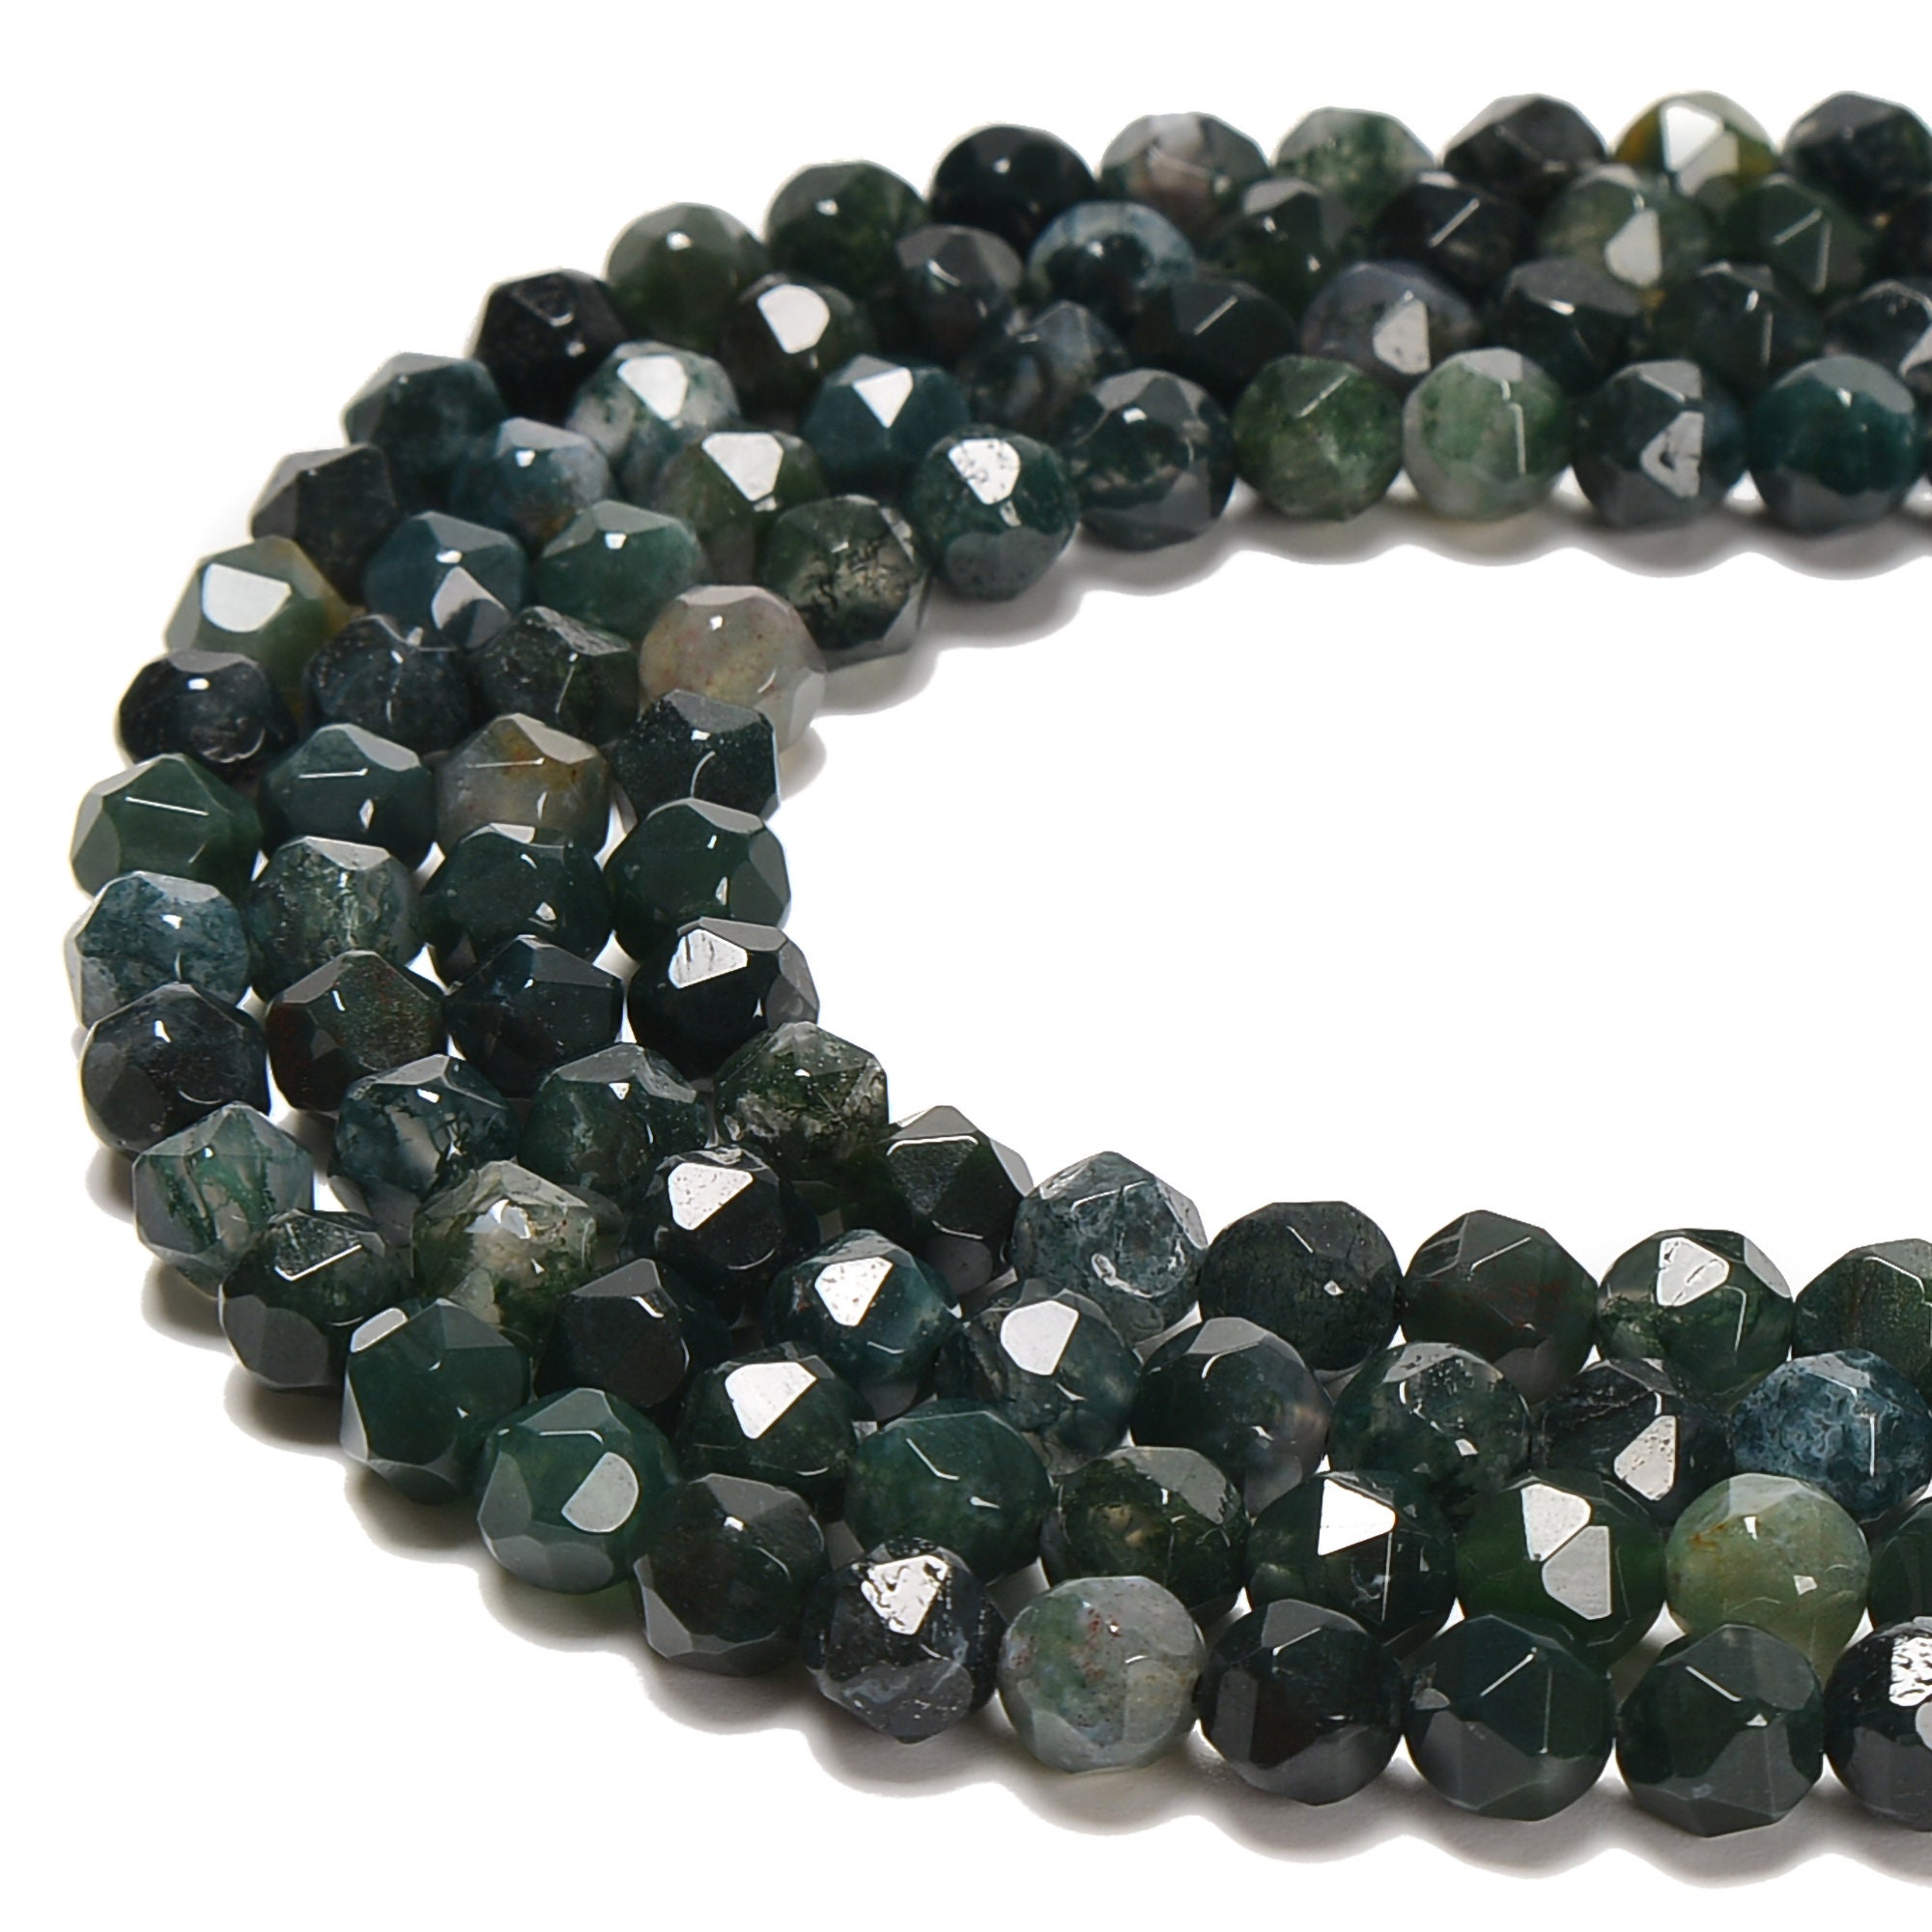 15 ½ IN 8 mm Faceted Natural Moss Agate Beads